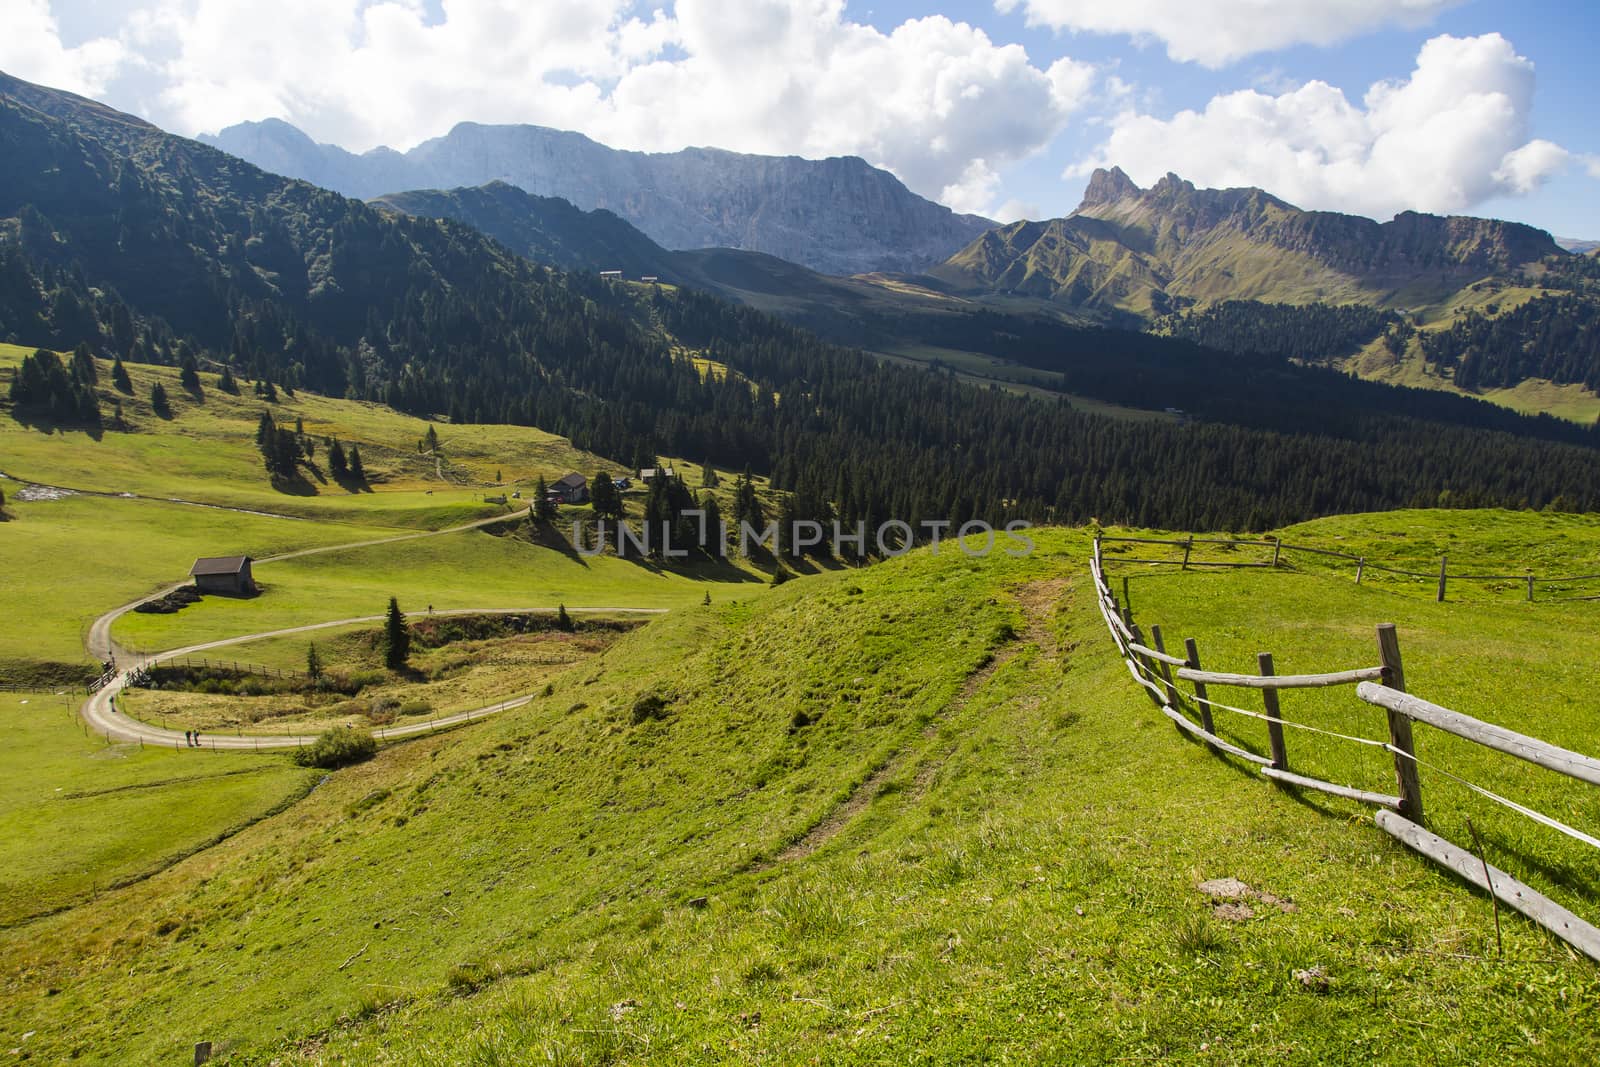 Mountain landscape with wooden fence, shelter and hiking trails